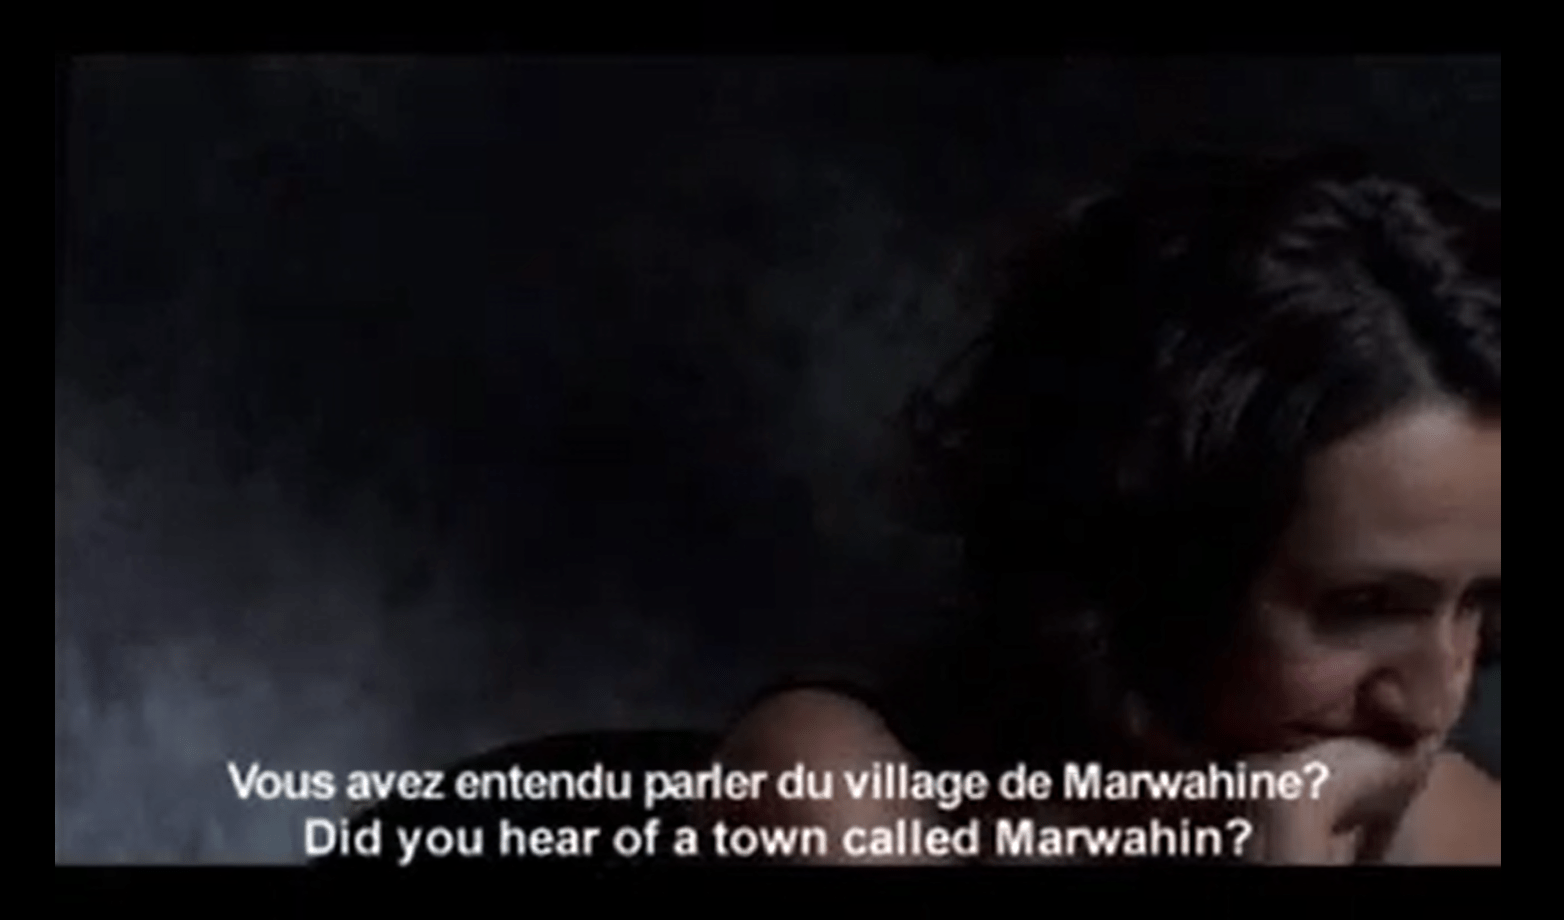 A screenshot from a film; the subtitles read: "Did you hear of a town called Marwahin?"